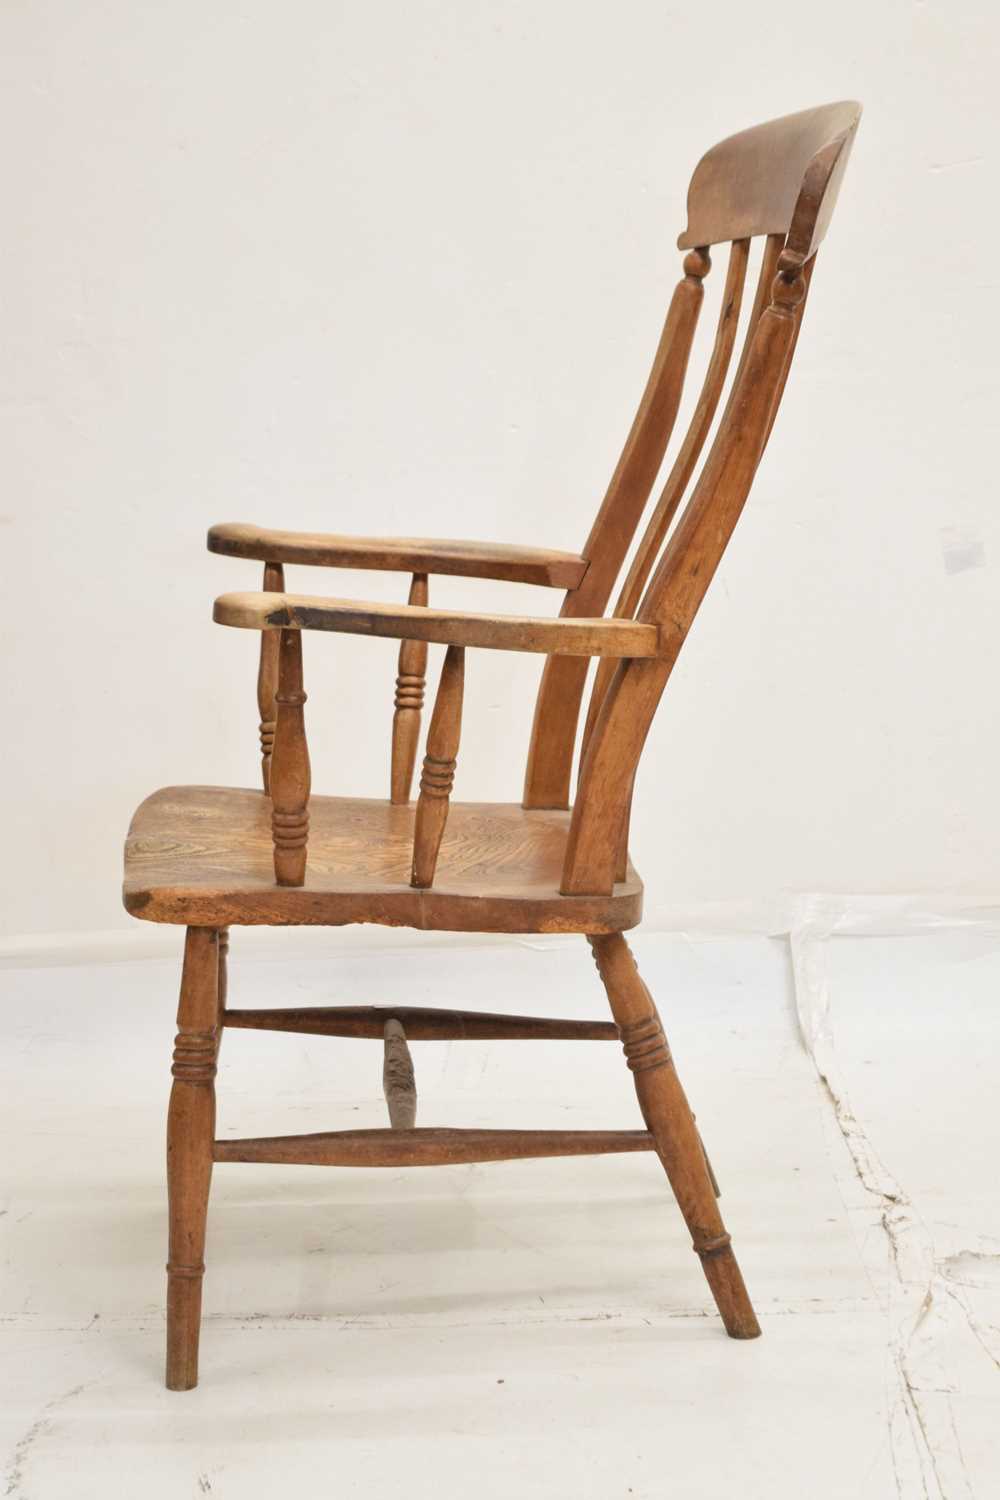 Mid 19th century ash and elm stick-back country chair - Image 6 of 7